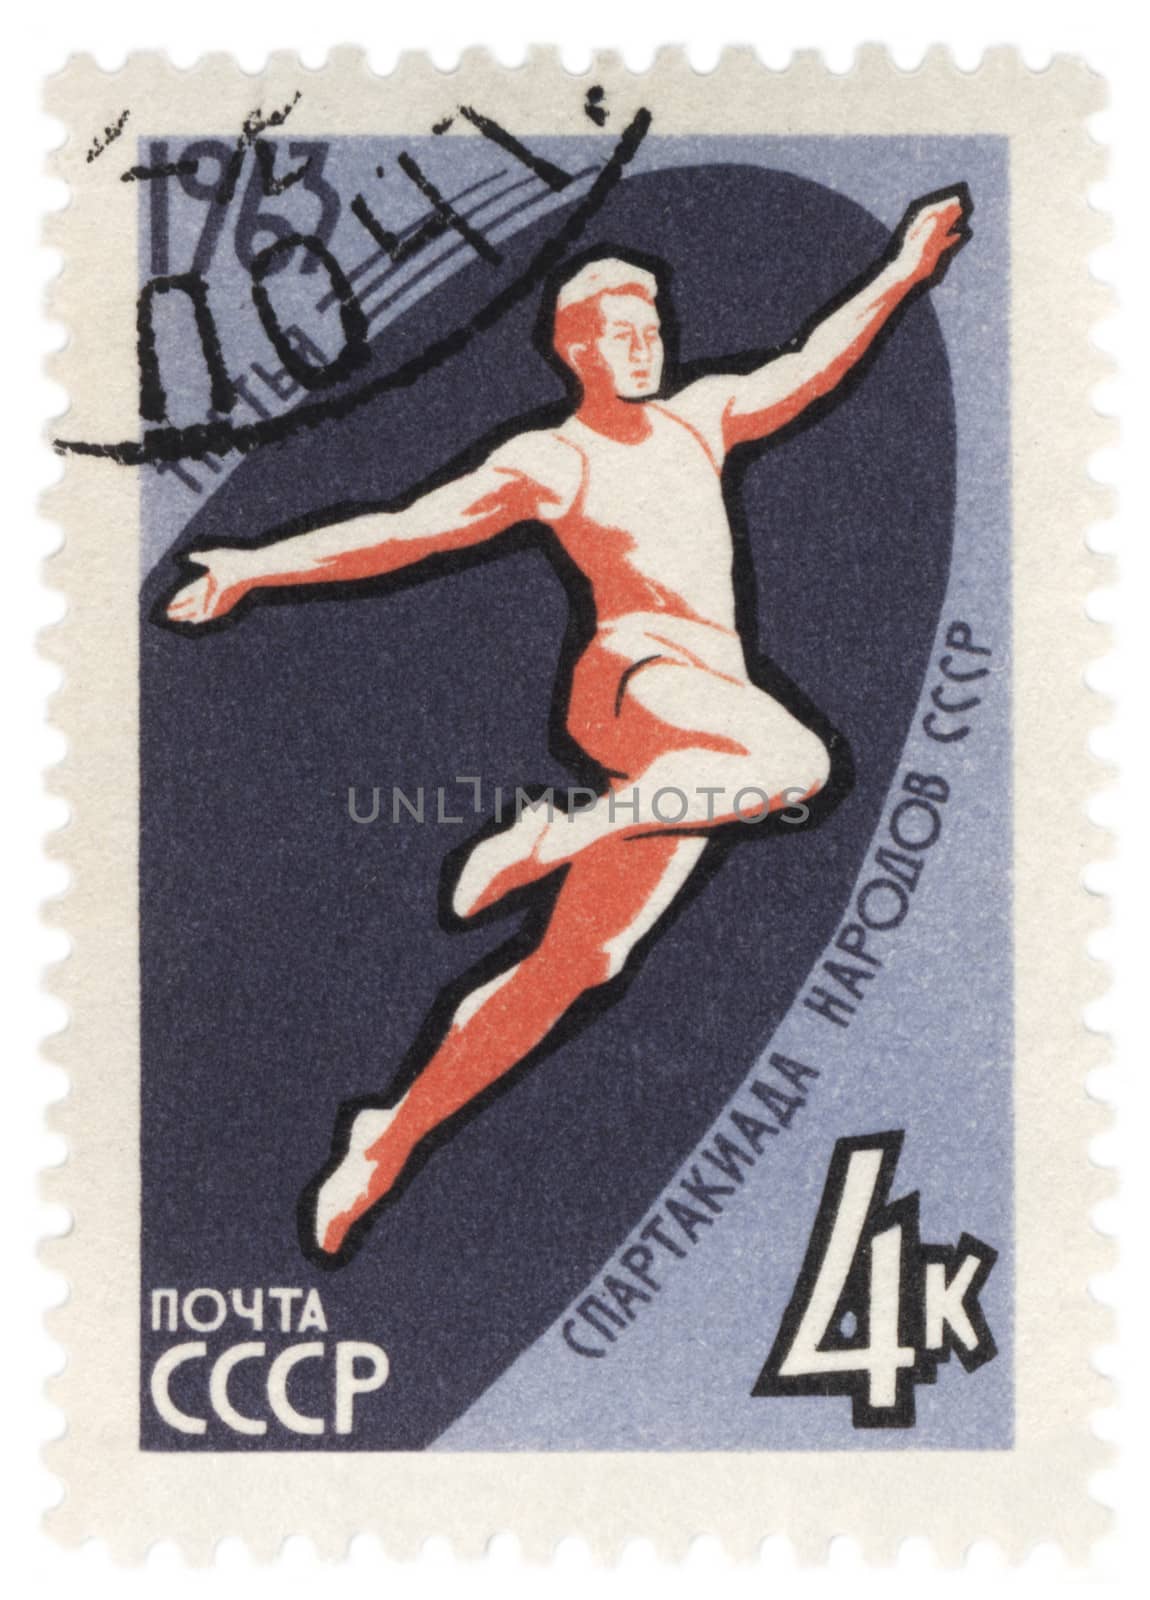 Long jumper on post stamp by wander